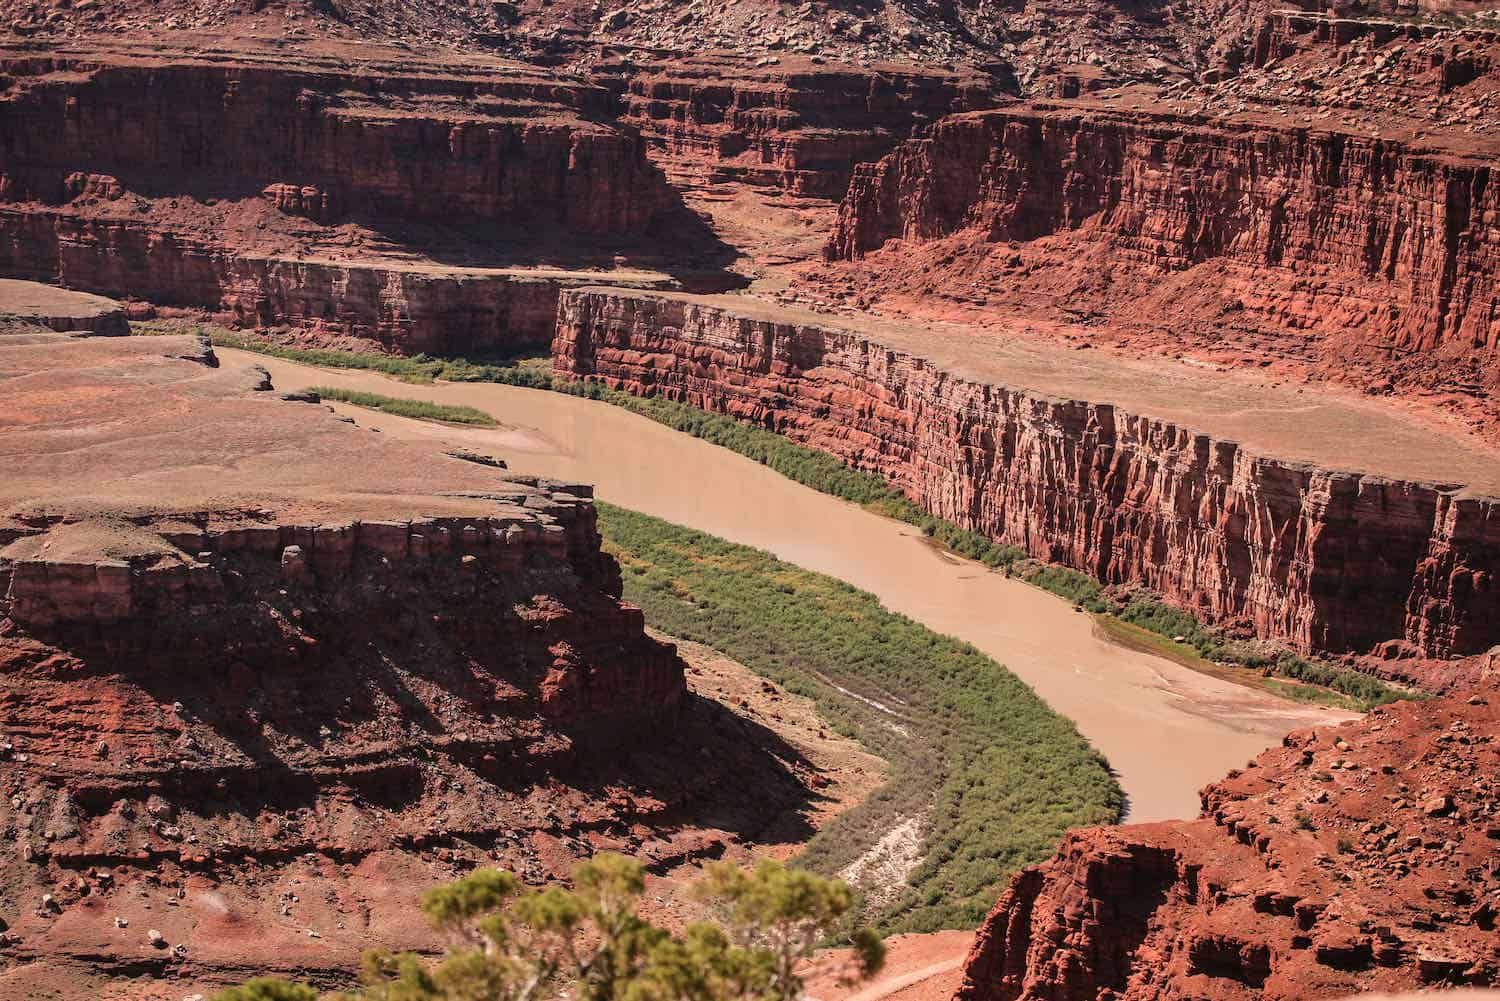 Section of muddy river winding through red cliffs